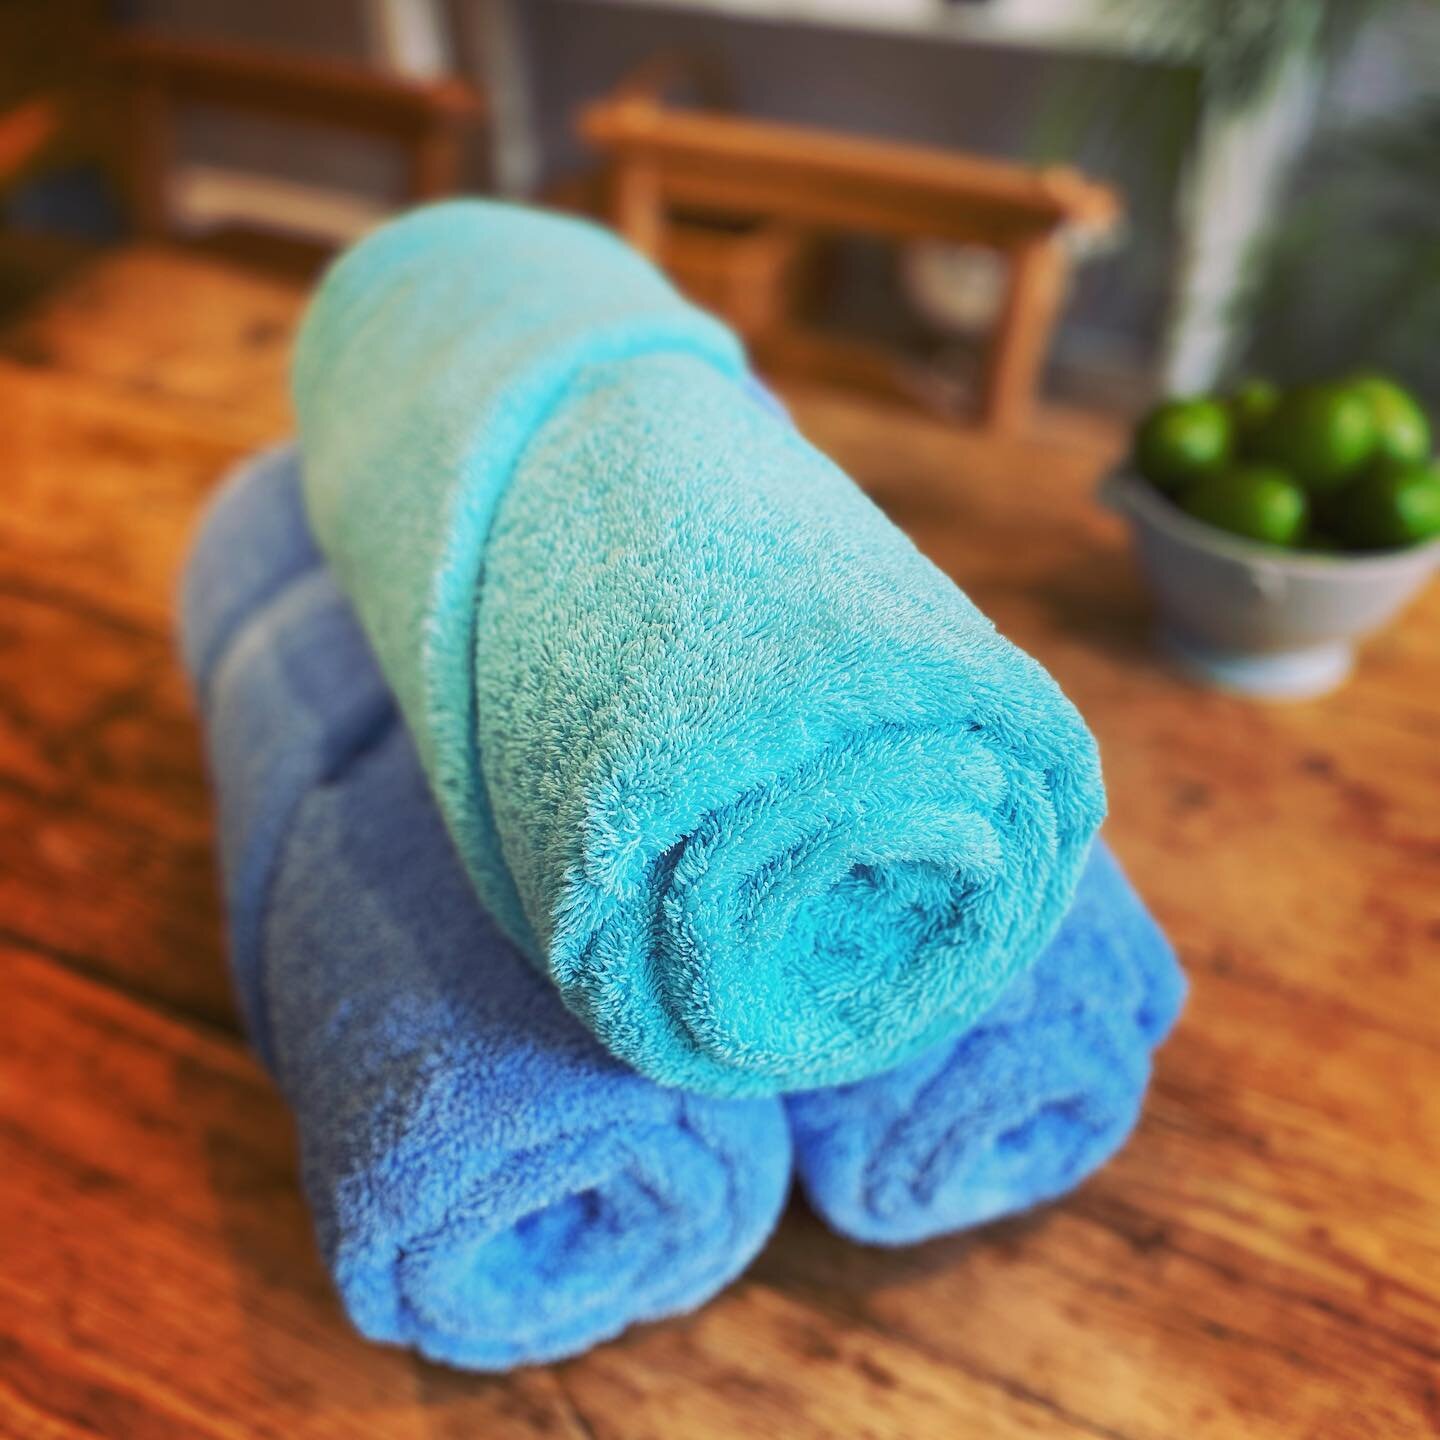 SQUEEZE THE DAY: Tips, tricks &amp; habits for a life of joy &amp; zest!🍈

✨Roll your towels!✨

I can&rsquo;t even tell you why, but there is something so very fun &amp; satisfying about rolling a towel. 😂

As a certified KonMari Consultant, I alwa